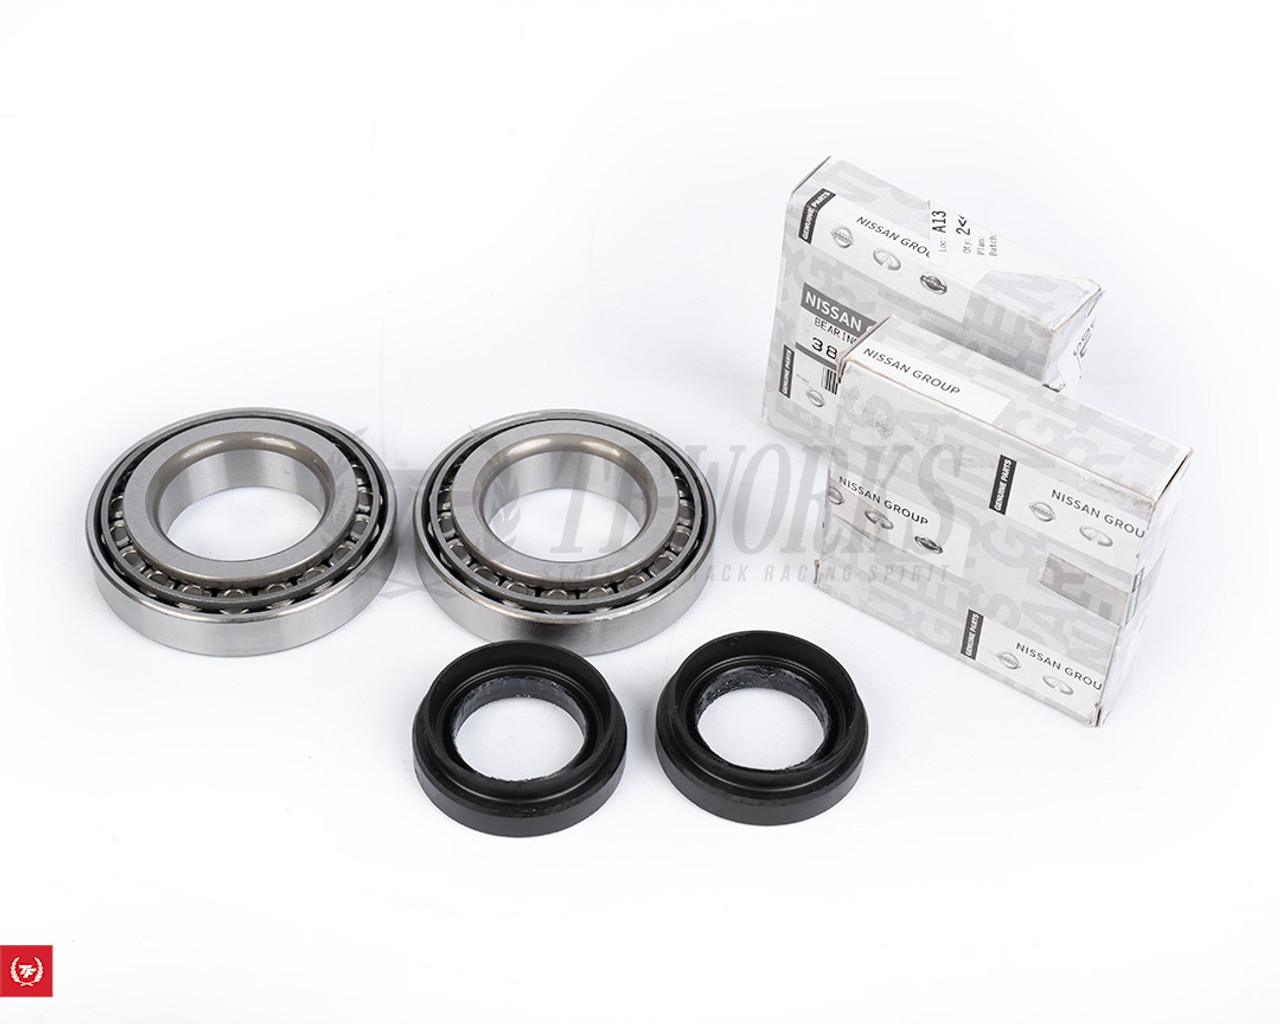 Nissan OEM Diff Carrier Bearing and OutPut Shaft Seal Kit - 240SX S13 / S14  / S15